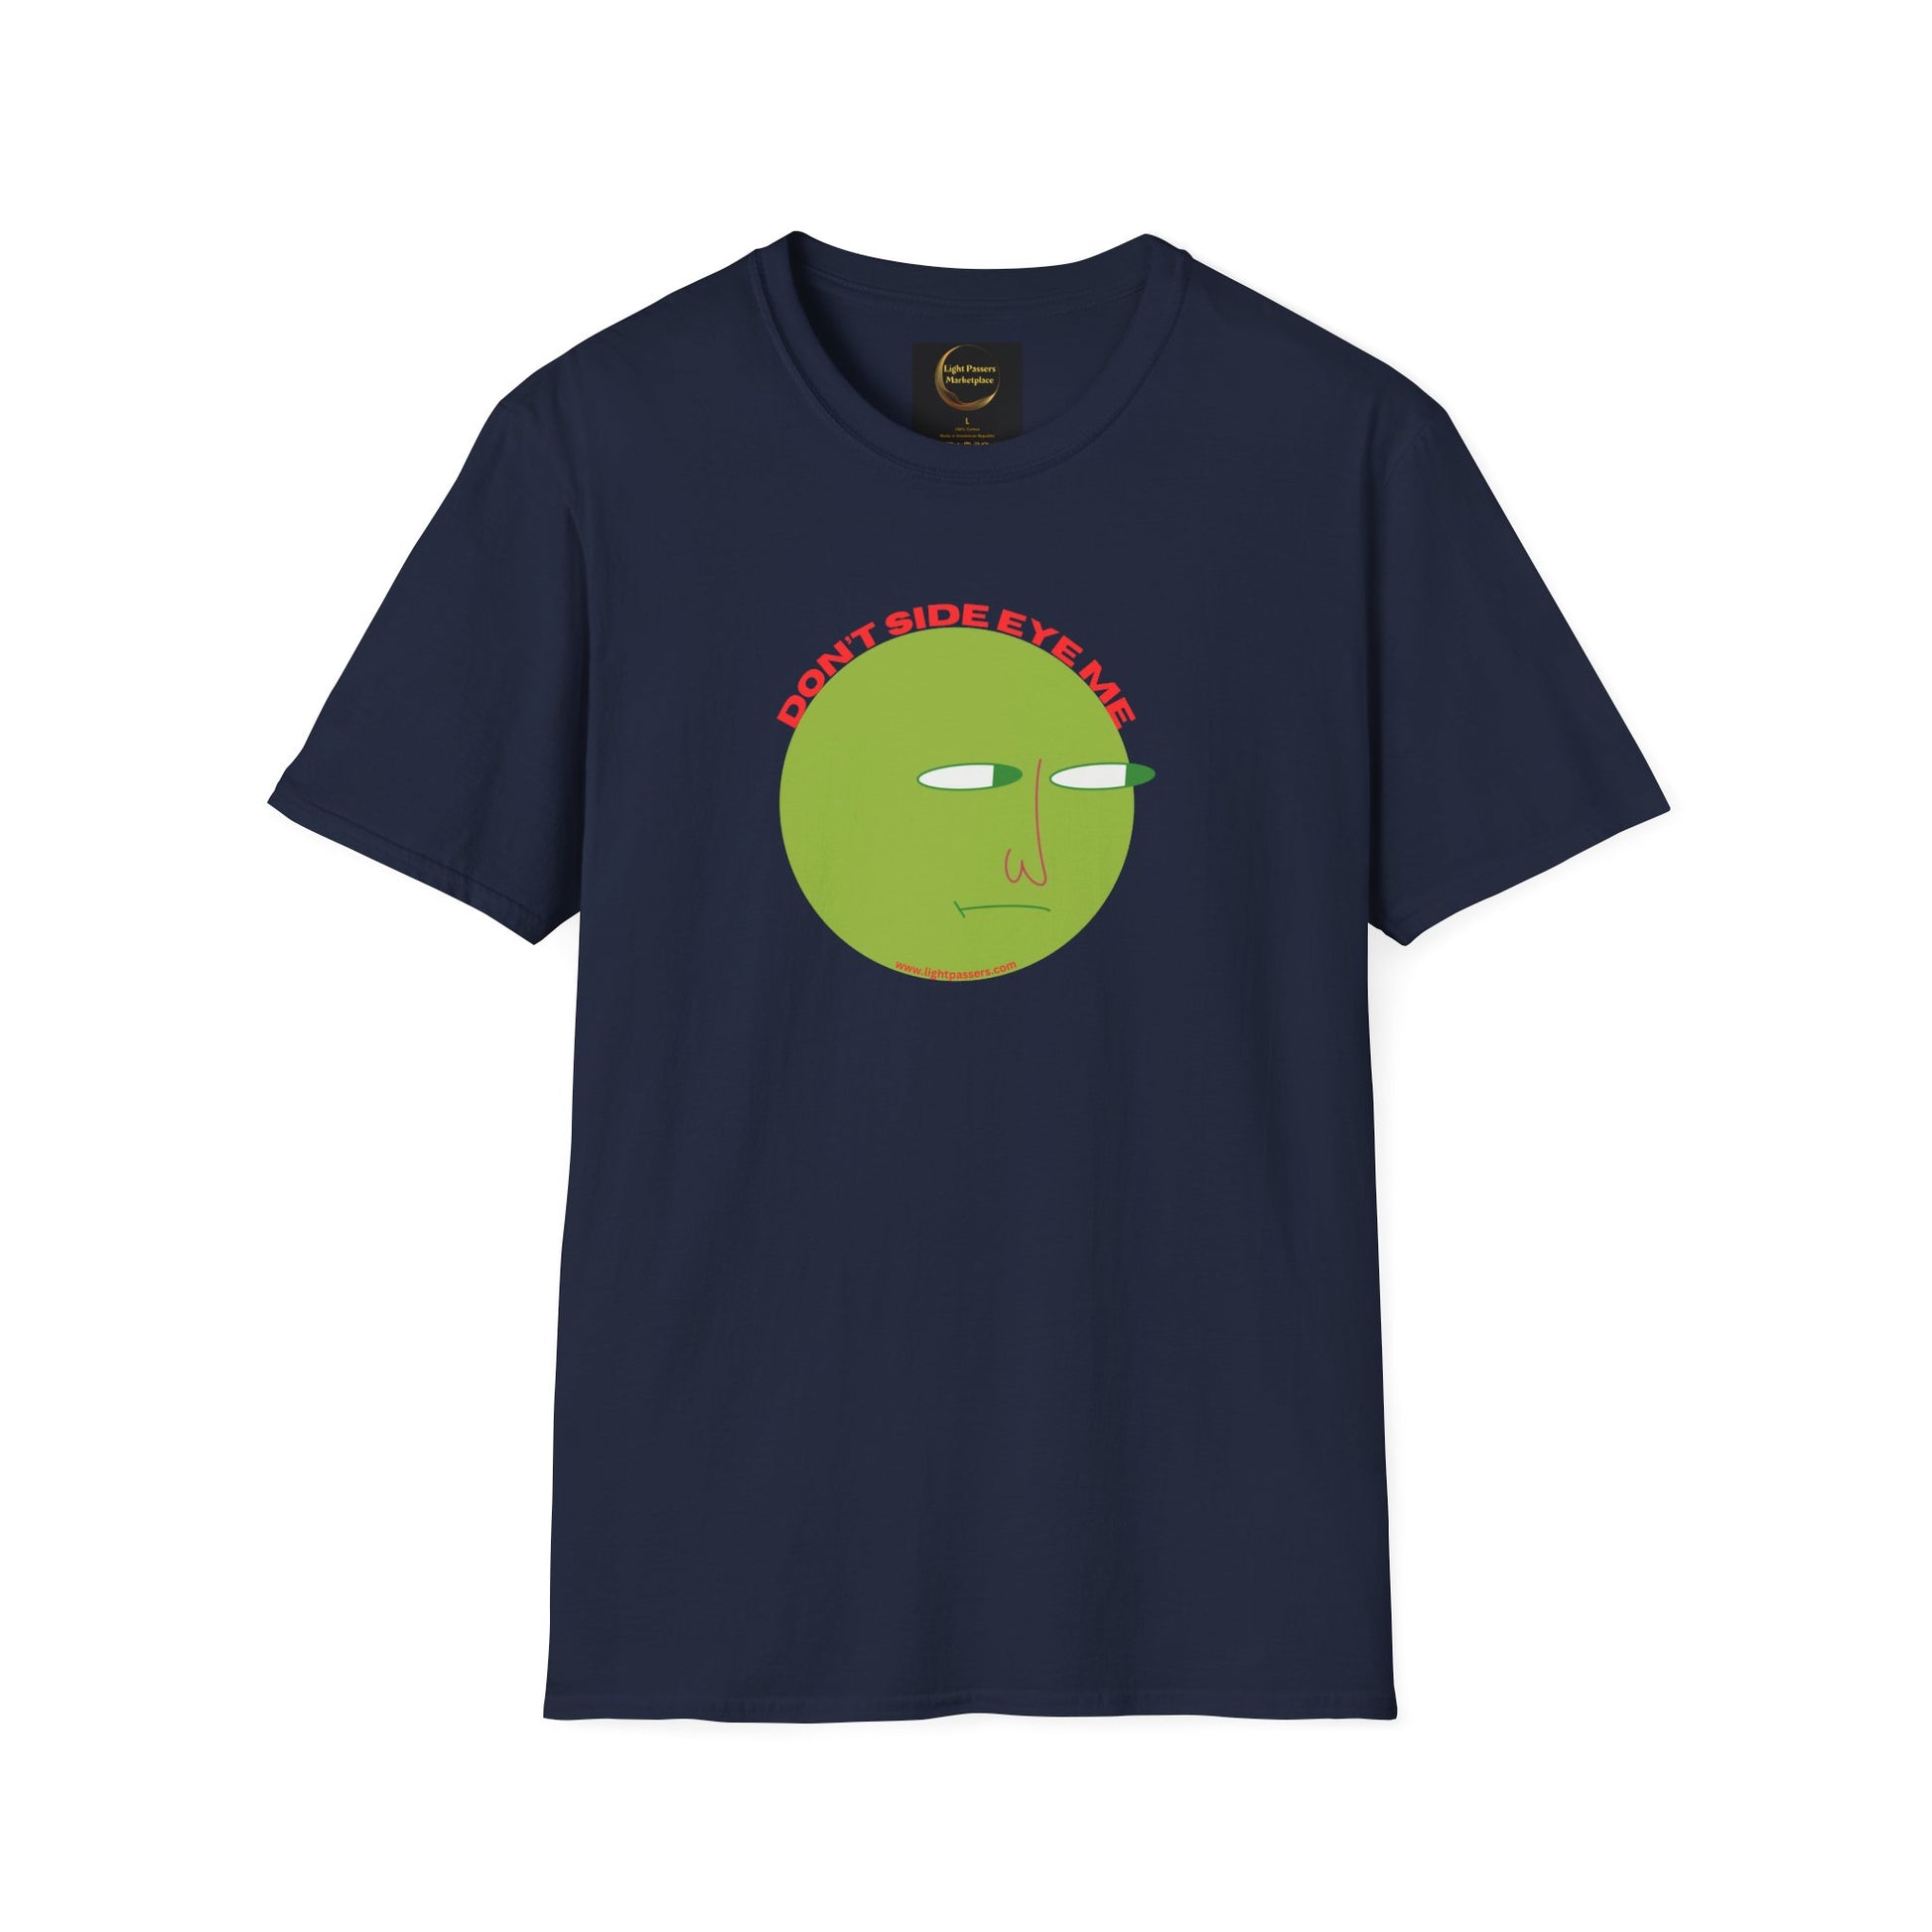 A blue unisex t-shirt featuring a green face graphic, made of soft 100% ring-spun cotton. Classic fit with twill tape shoulders and ribbed collar for durability and comfort. Ethically sourced and Oeko-Tex certified.